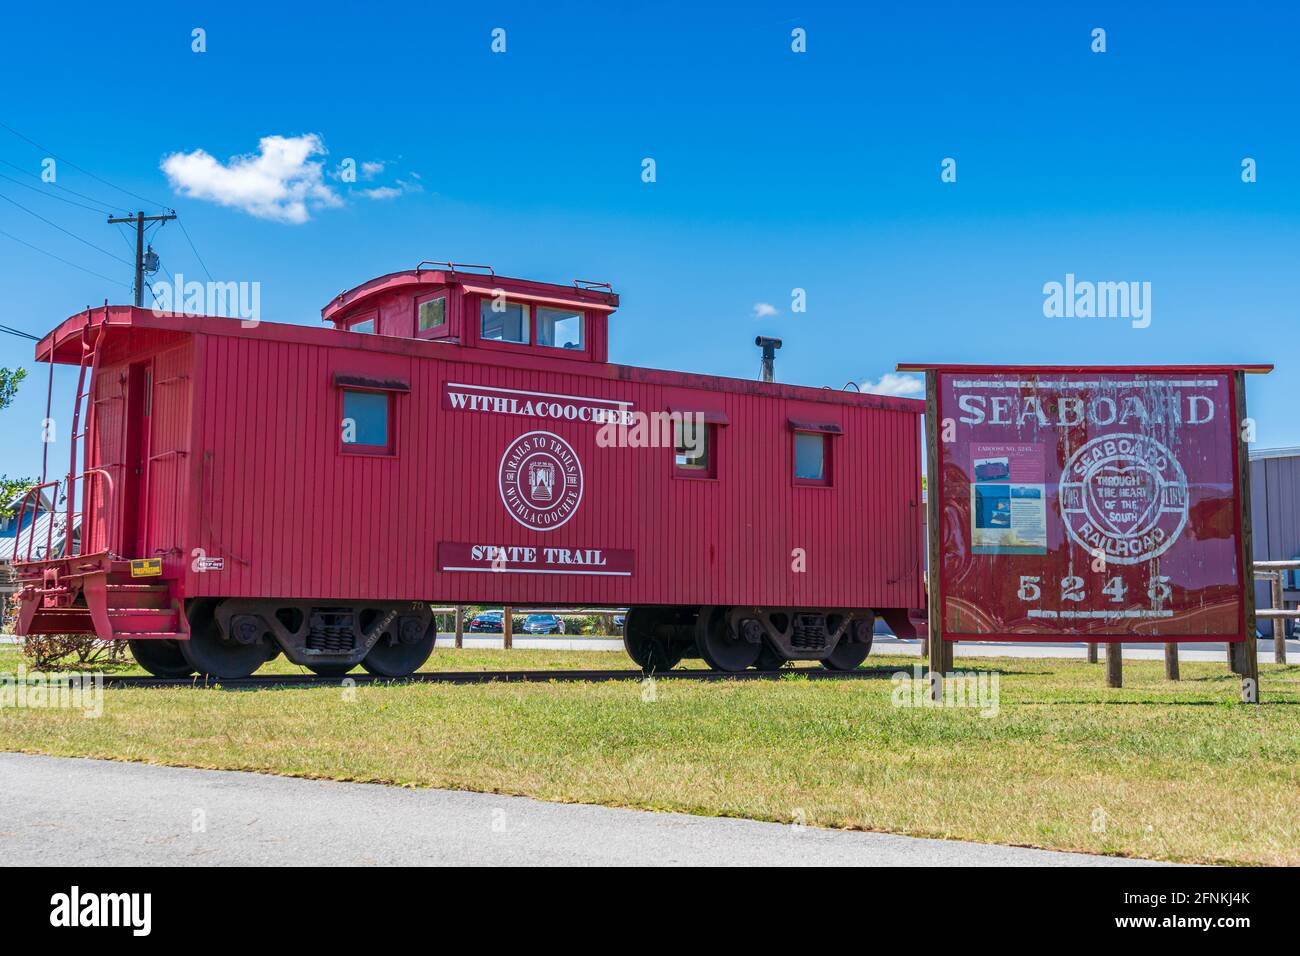 Caboose No. 5245 at the Apoka Avenue trail head of the Withlacoochee State Trail, a paved rail trail - Inverness, Florida, USA Stock Photo